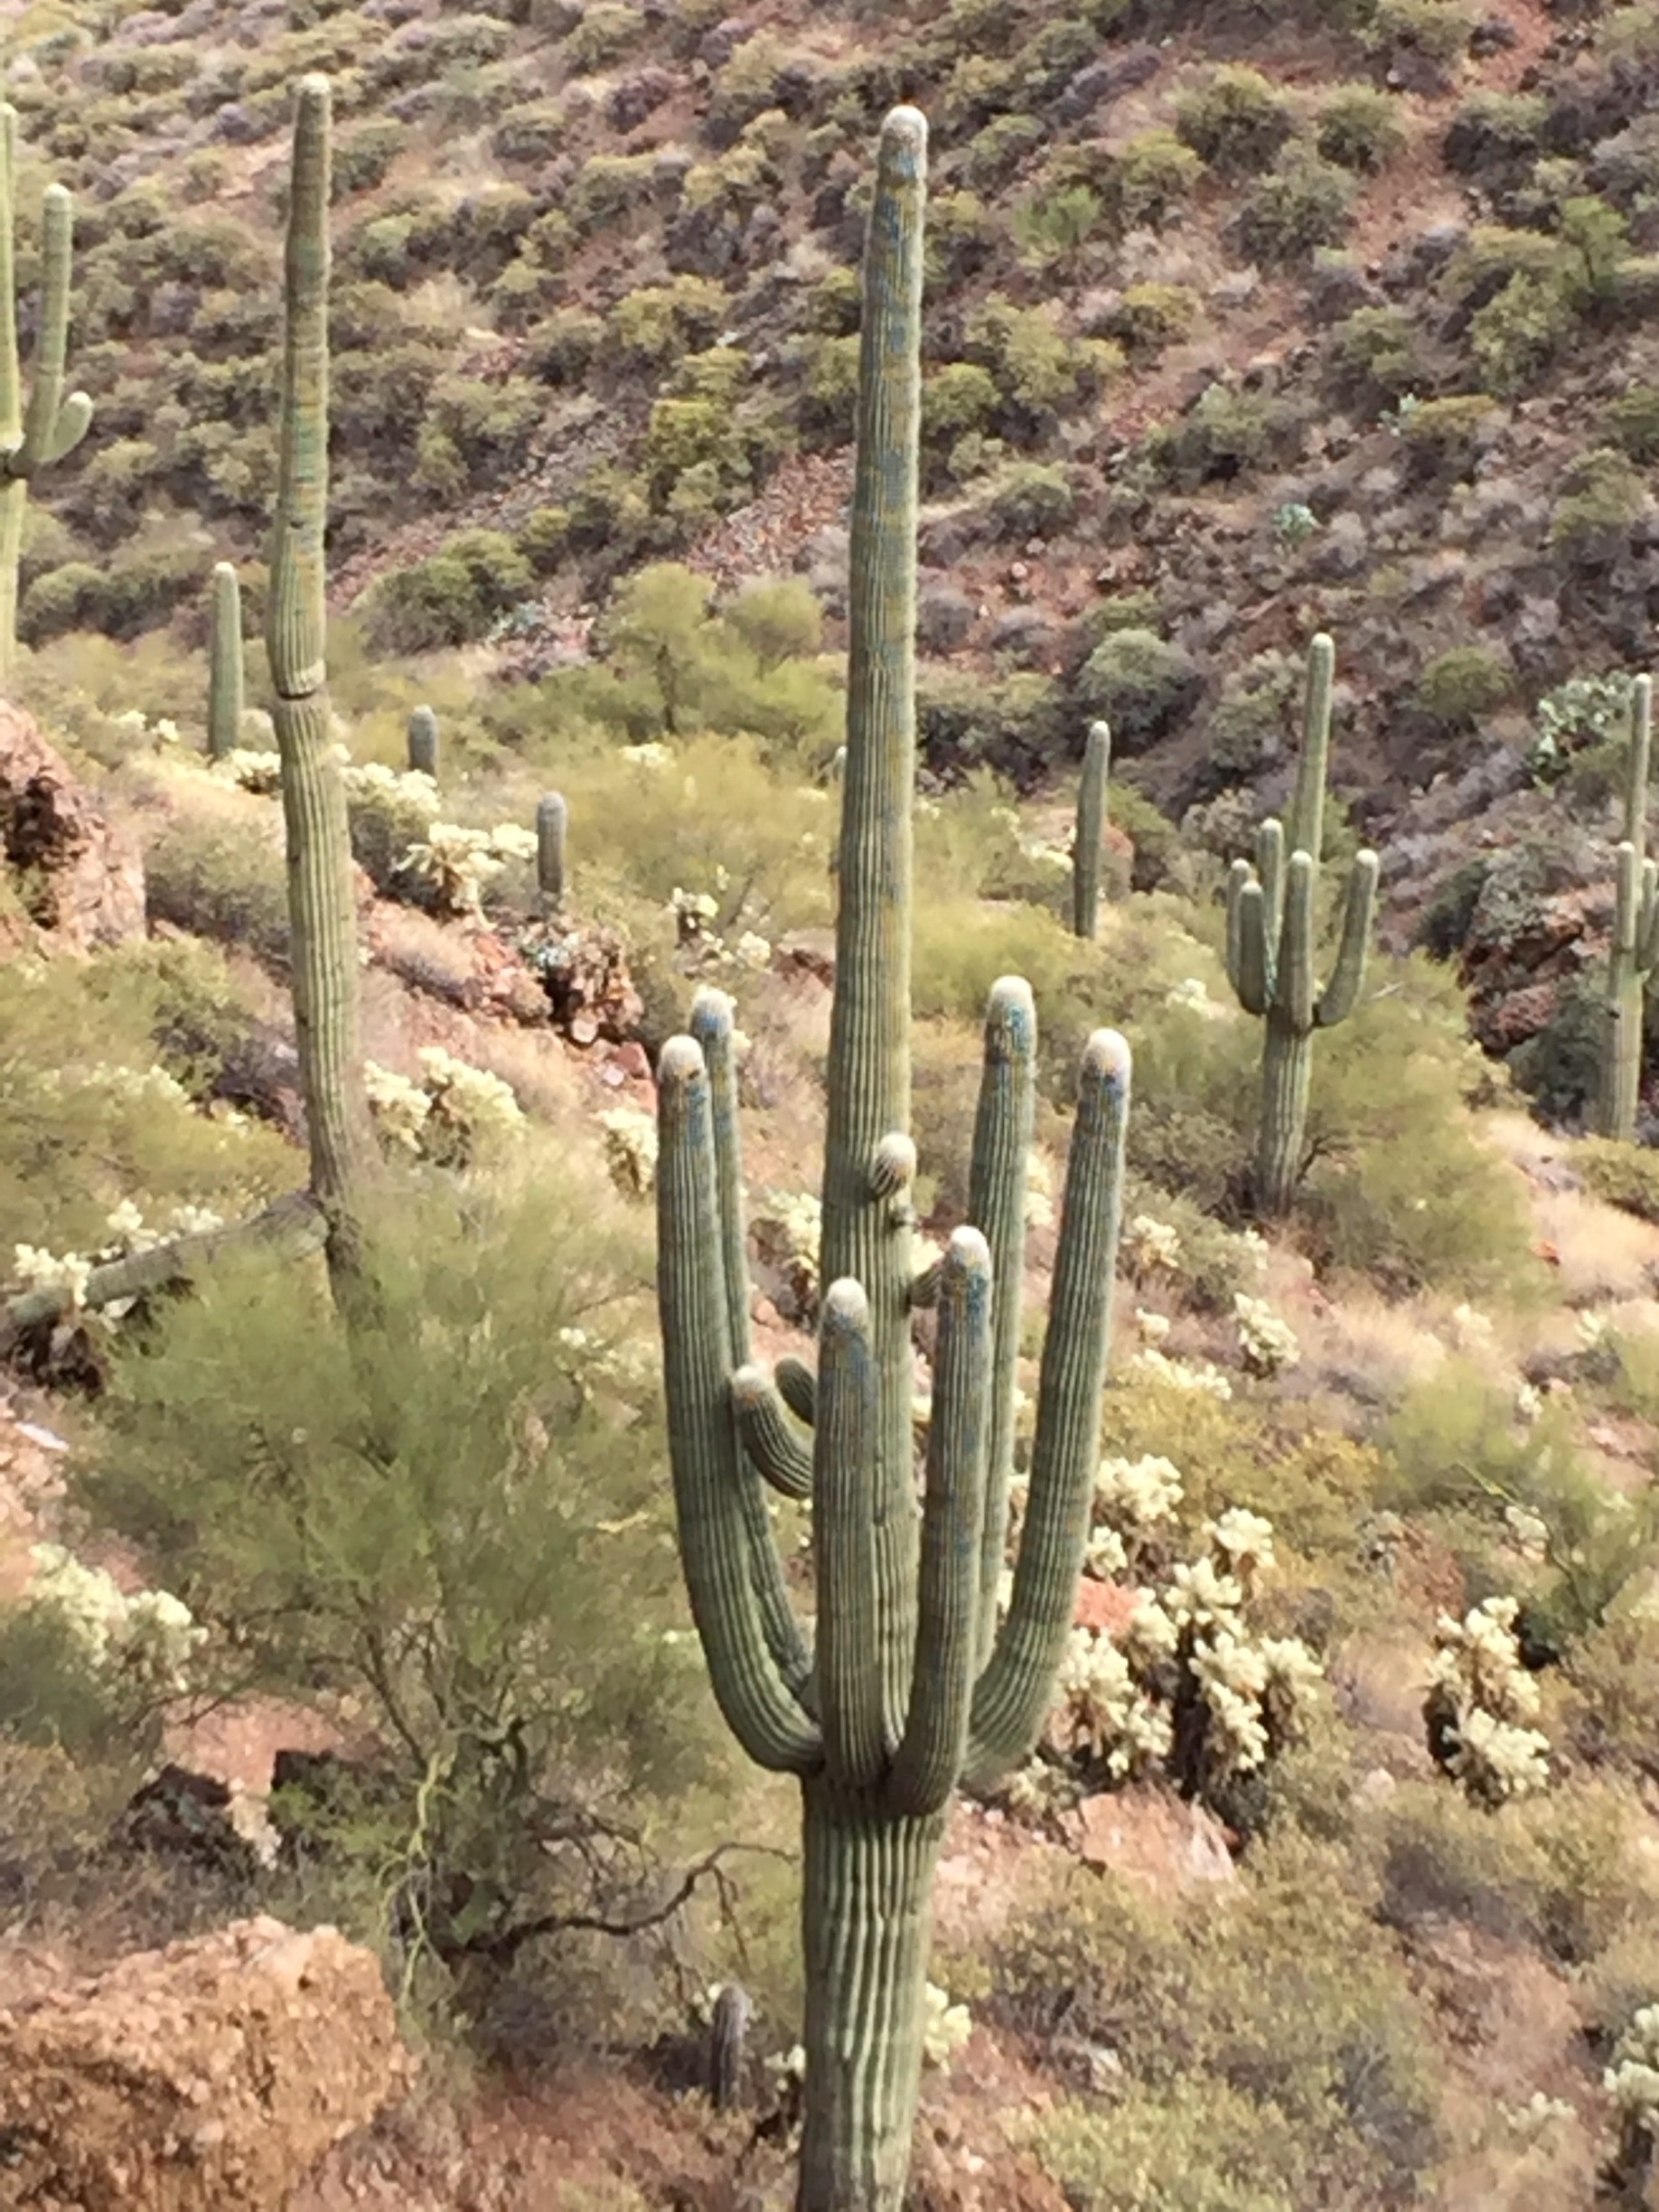 Enjoyed seeing these beautiful saguaro along the Apache Trail in the Tonto National Forest. Great road trip! Be sure and stop by Tortilla Flats on your way.